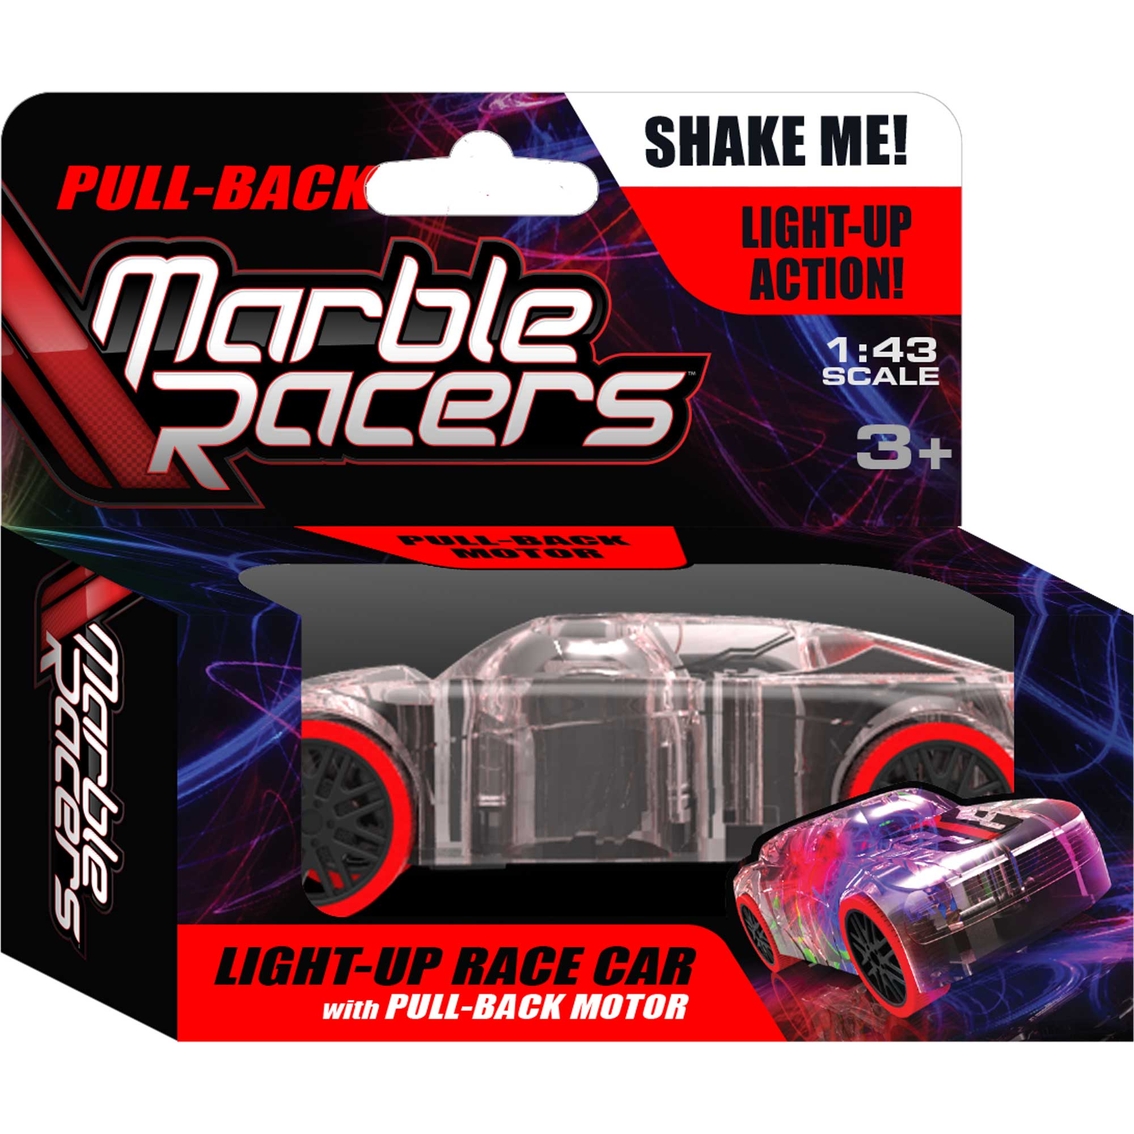 Marble Racers Light up 1 43 Scale Race Toy Car With Pull-back Motor Set of 2 for sale online 